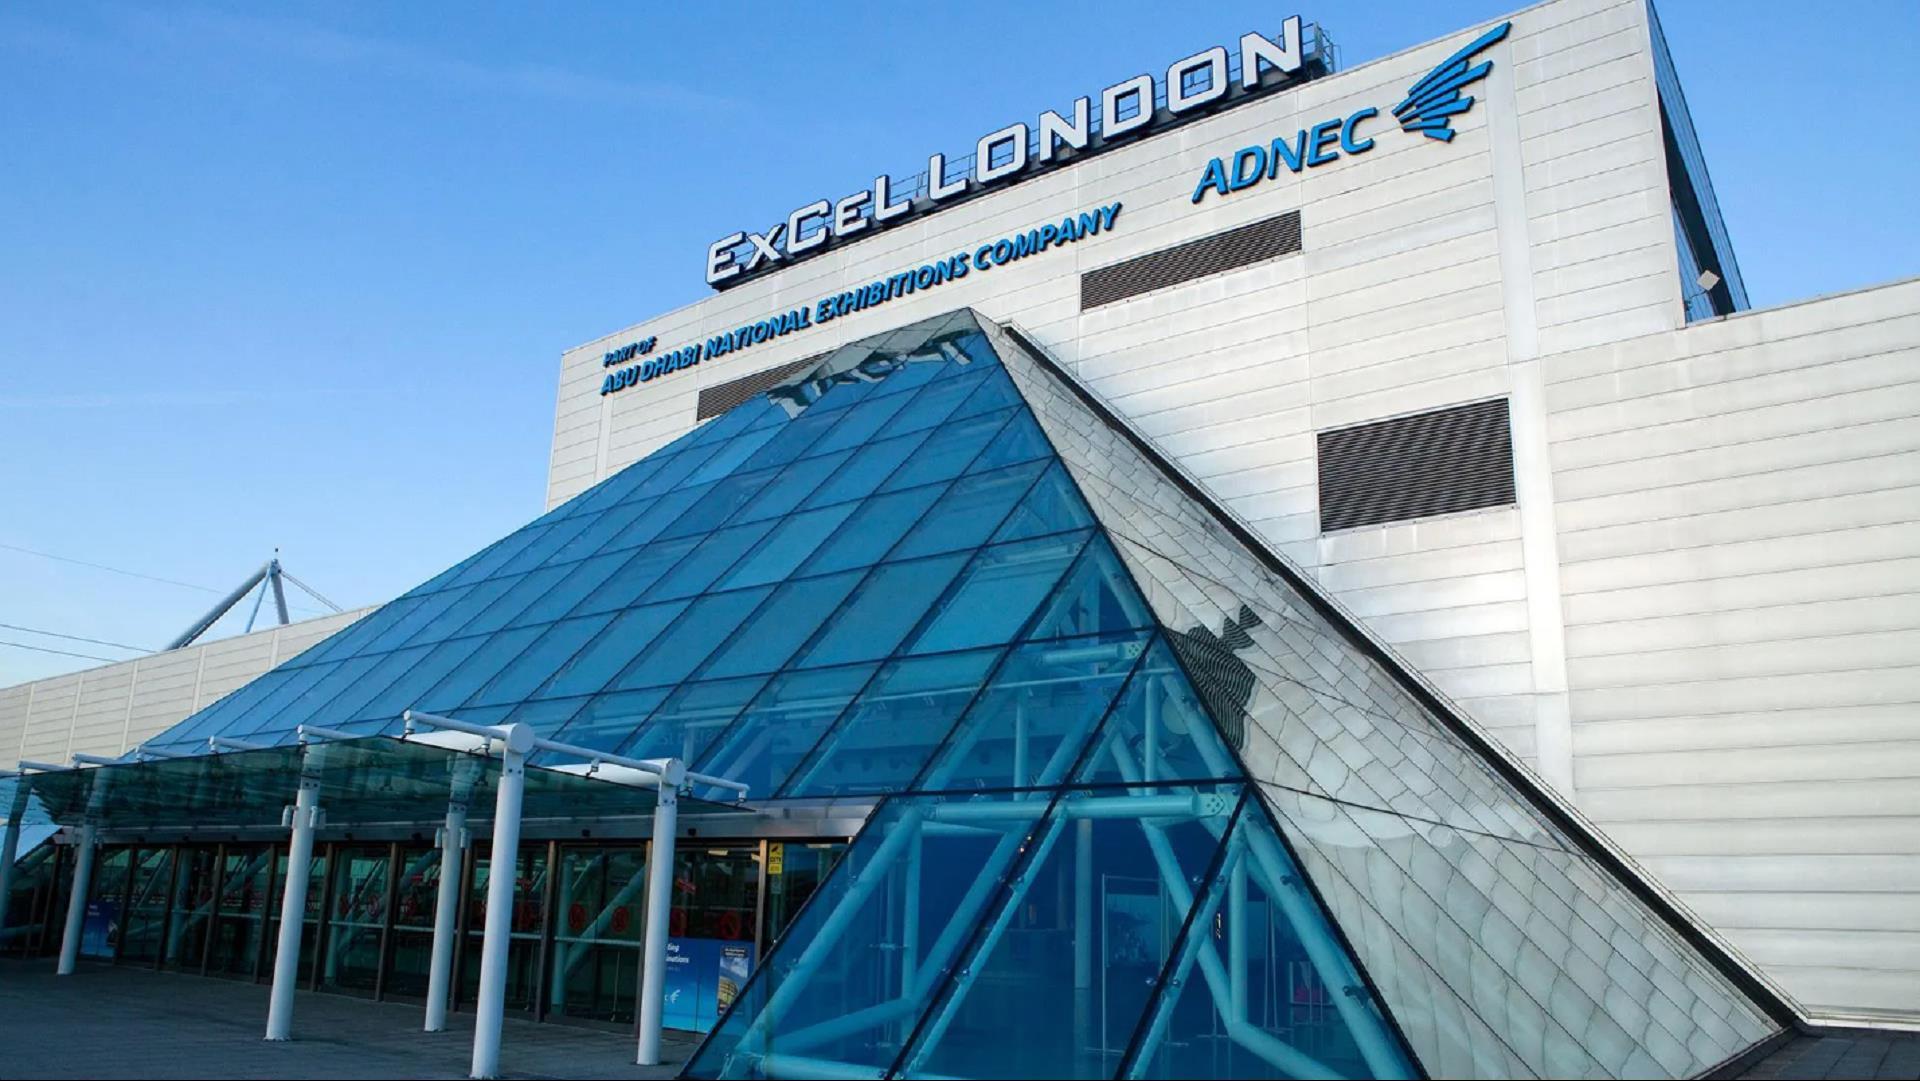 ExCeL London Convention & Exhibition Centre in London, GB1